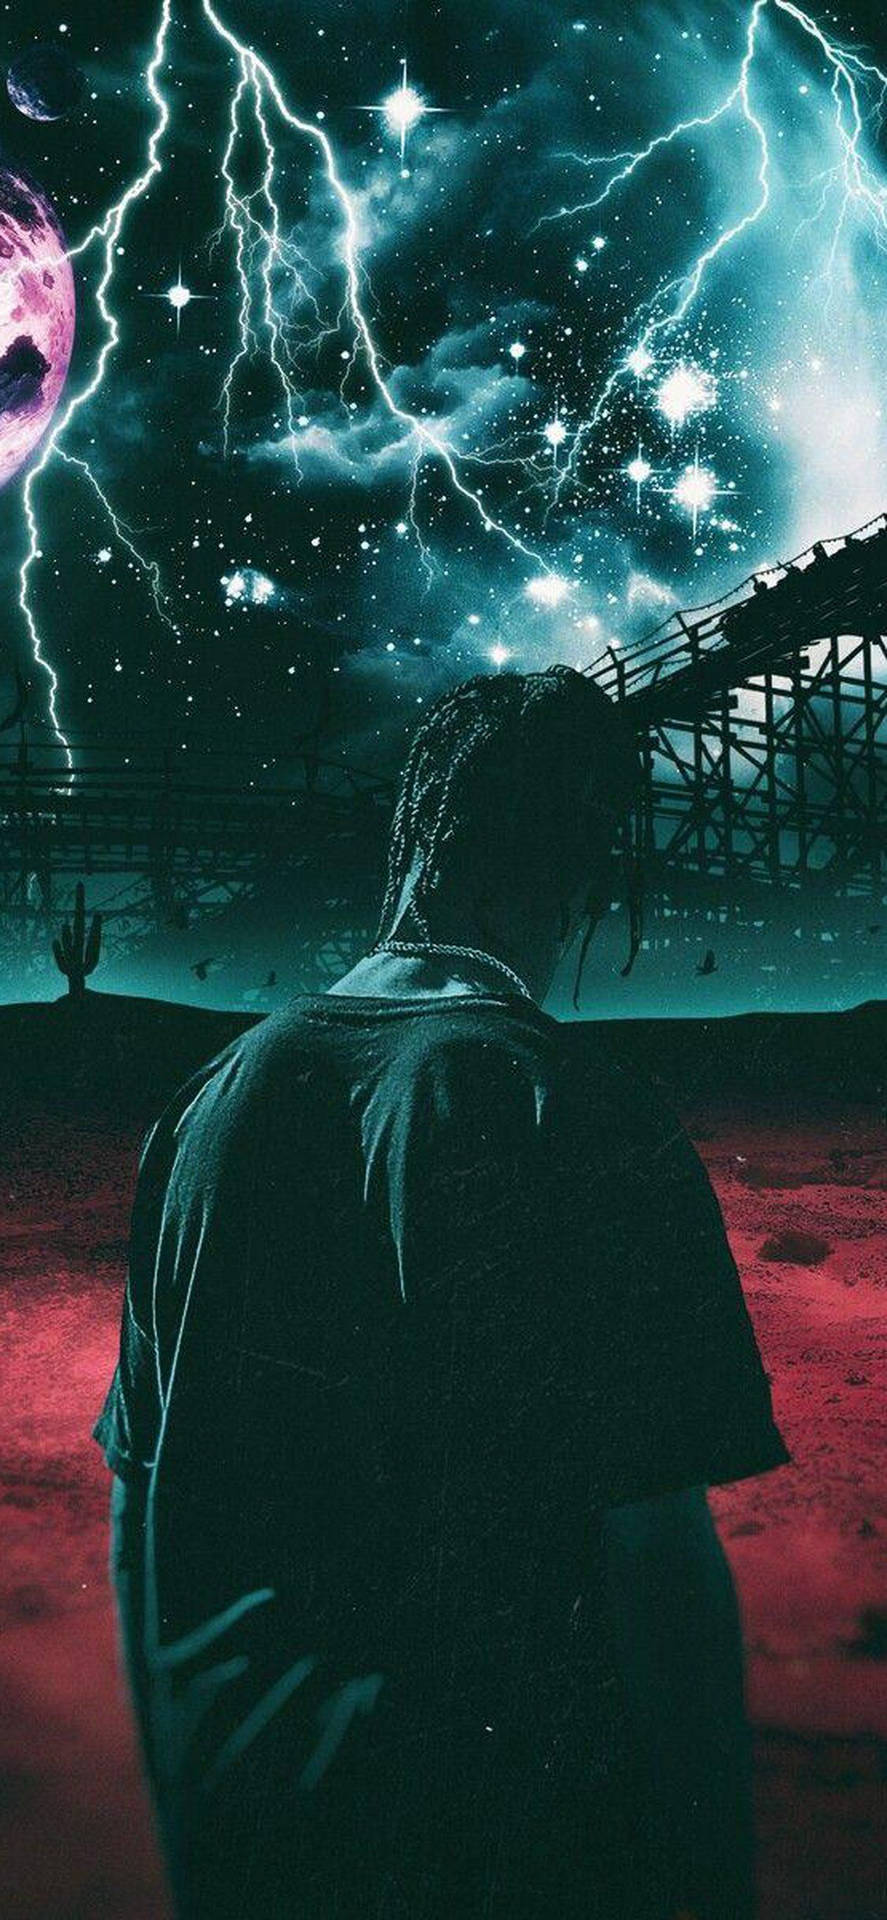 Take a Magical Ride On Astroworld With Travis Scott Wallpaper